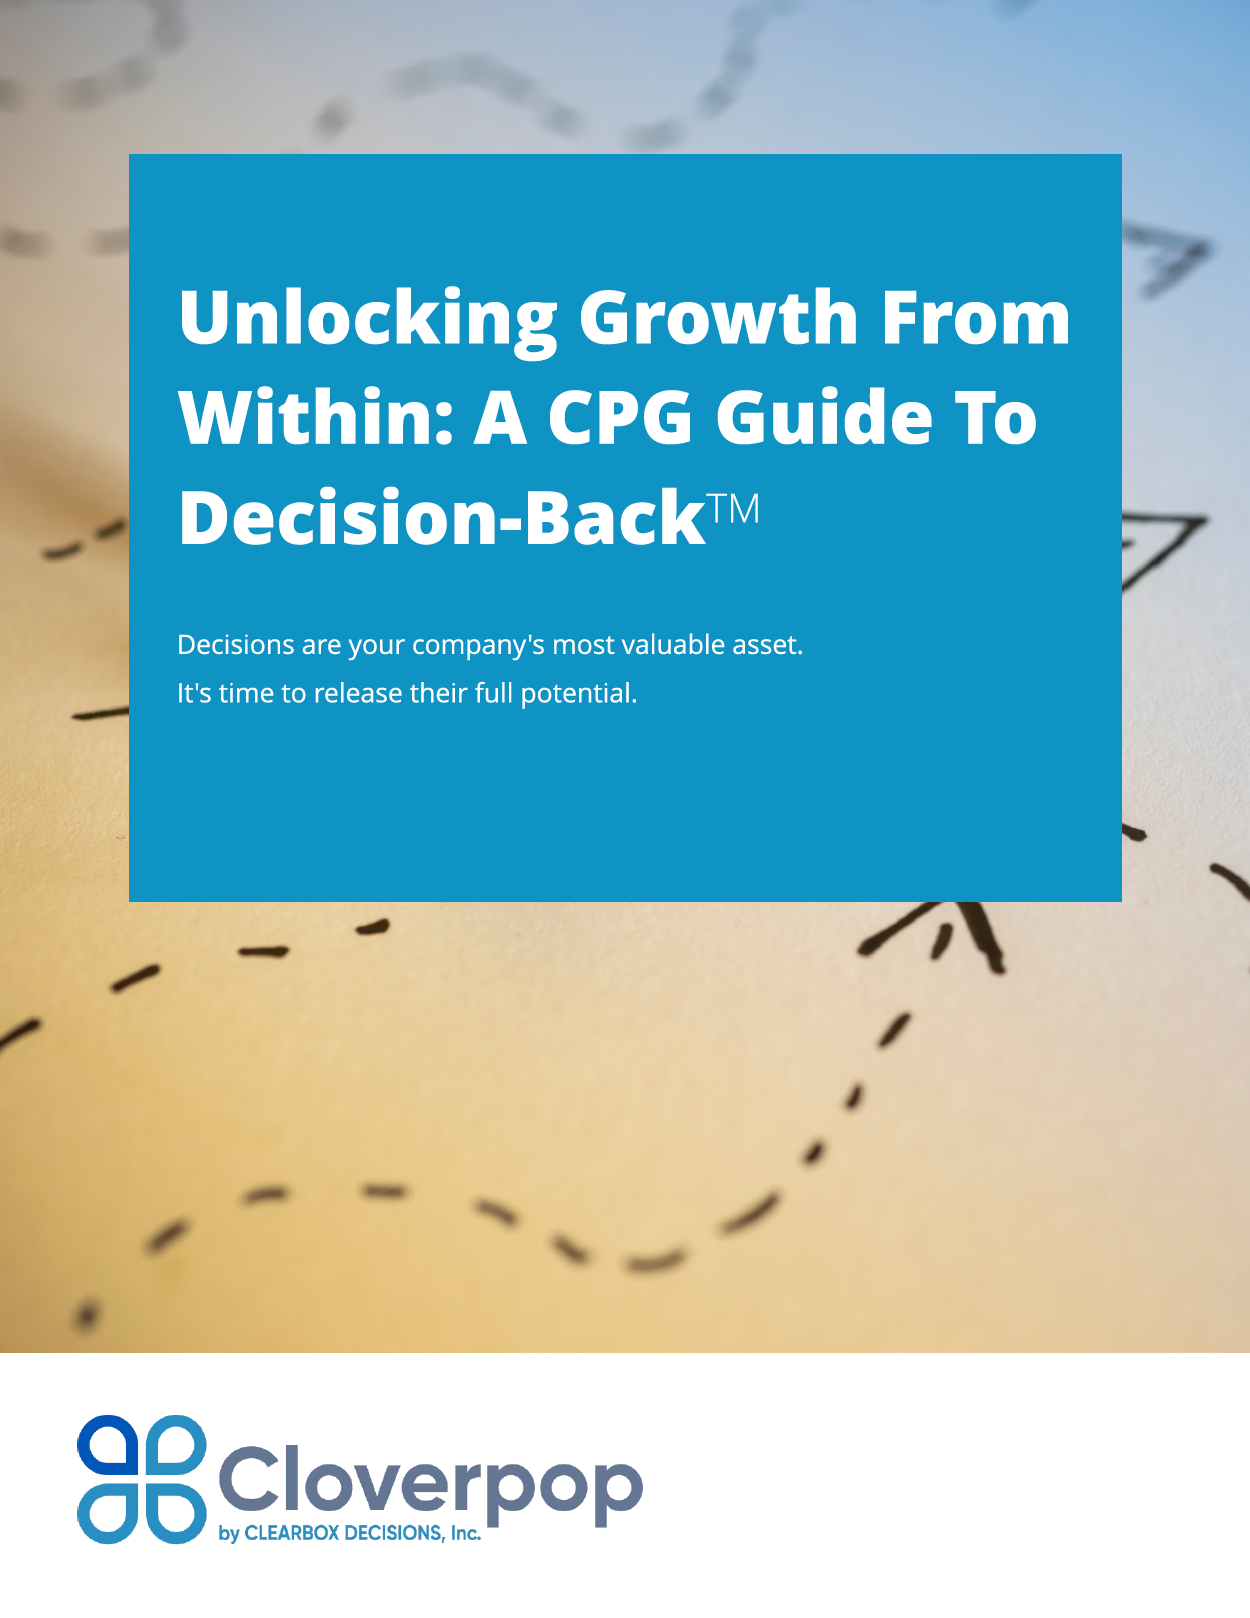 CPG Growth Guide To Decision-Back Cloverpop White Paper